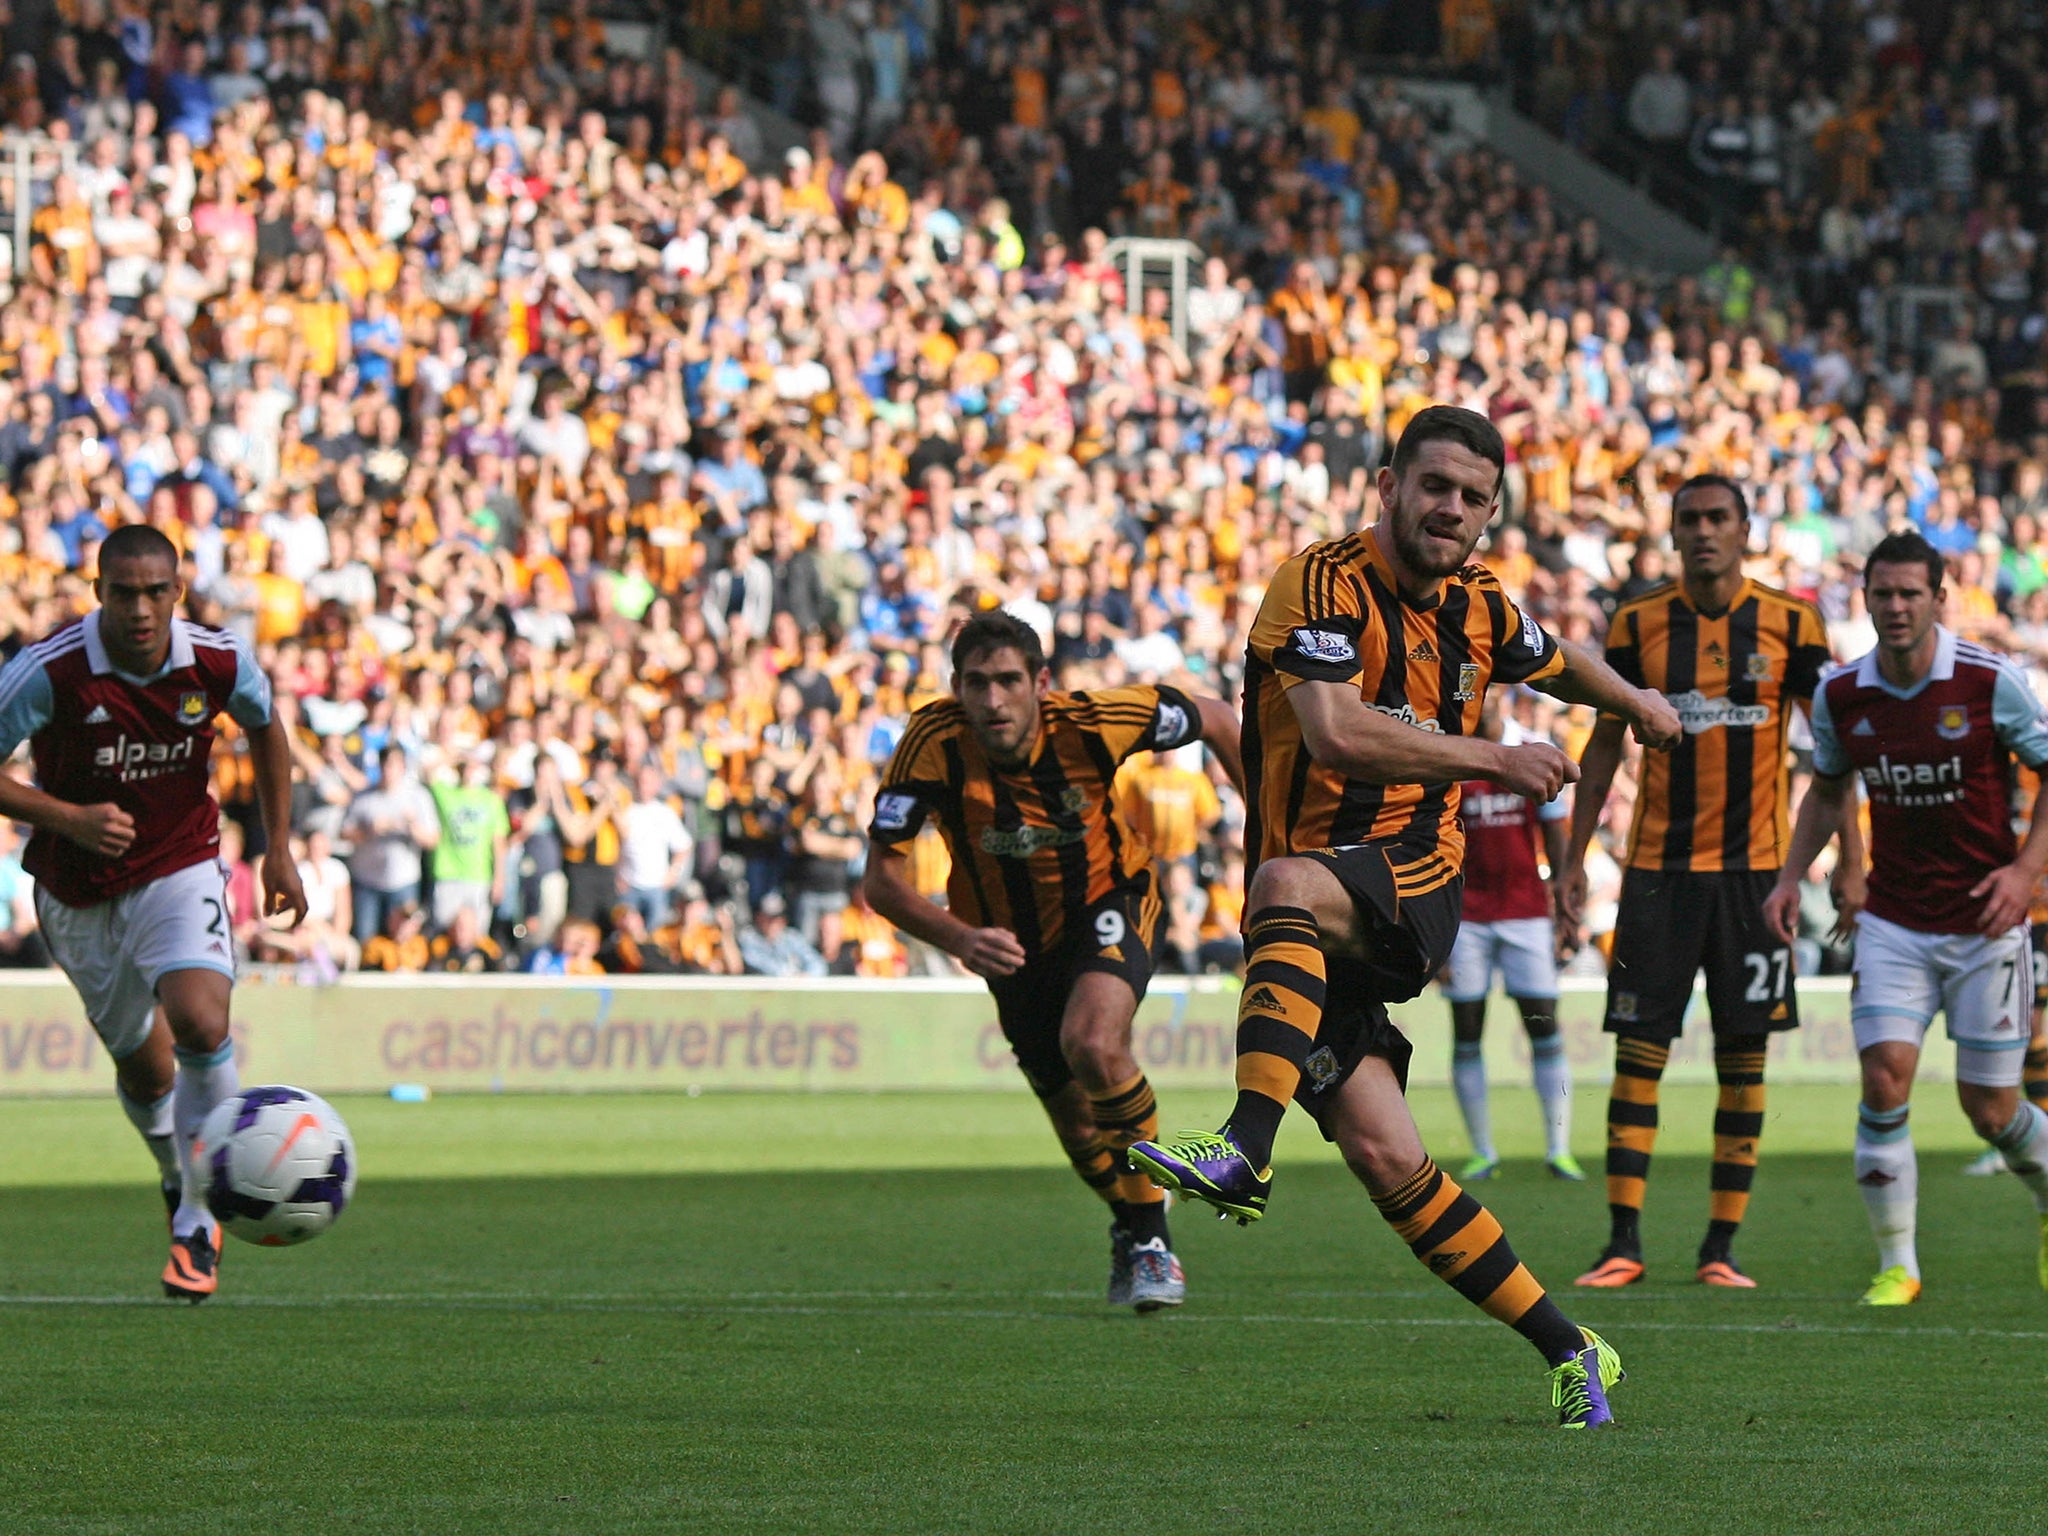 Robbie Brady scores from the spot to give Hull the win over West Ham